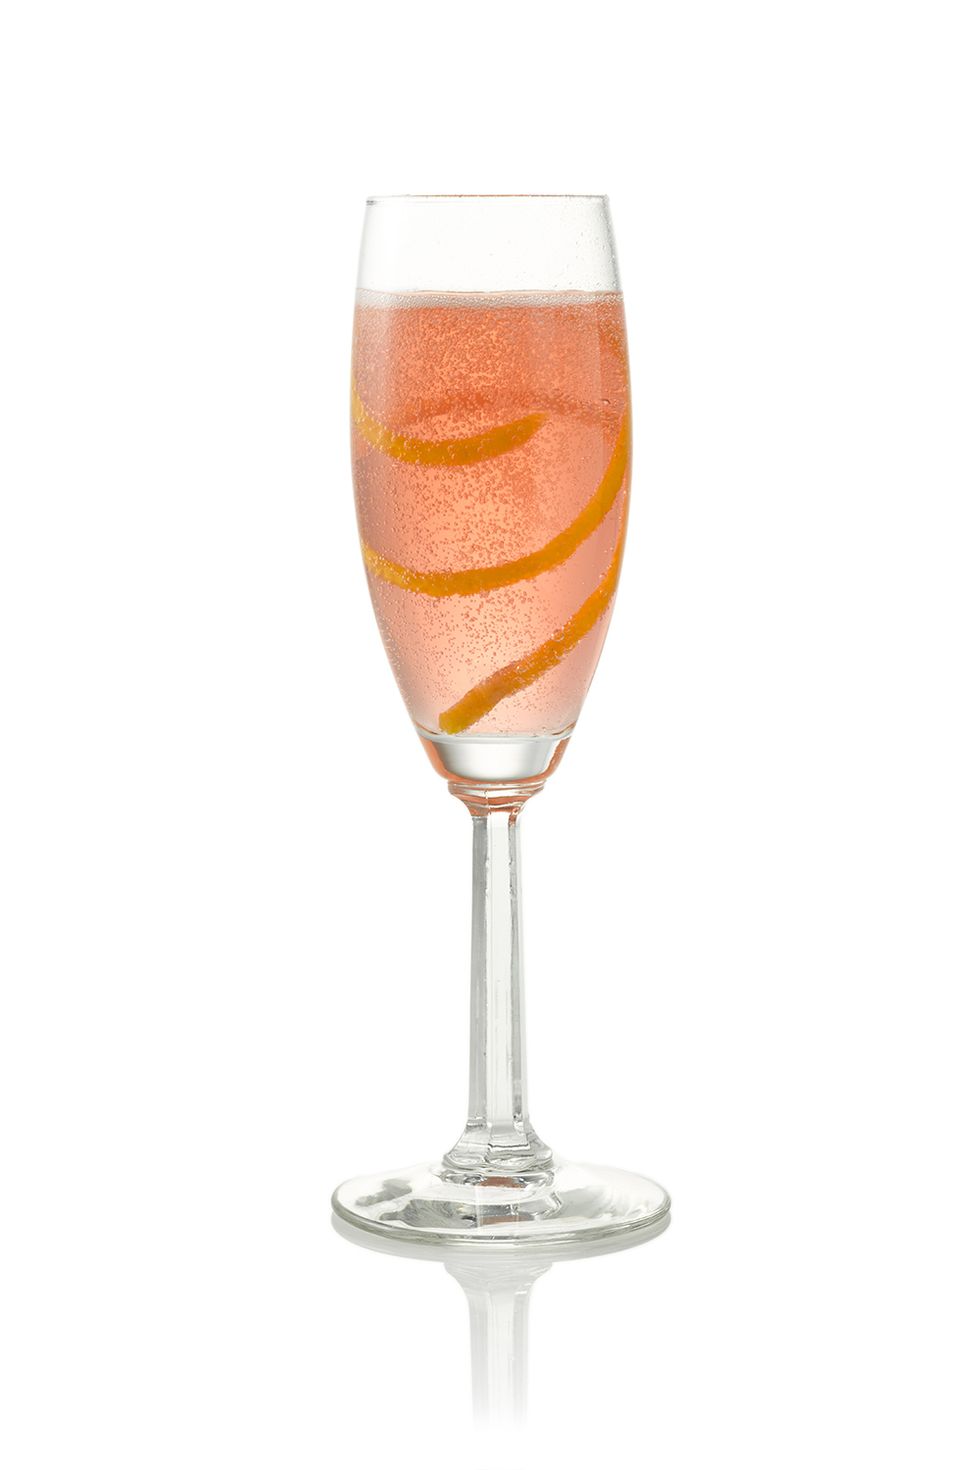 <p><strong data-redactor-tag="strong" data-verified="redactor">Ingredients:&nbsp;</strong></p><p>1 oz. Cointreau</p><p>1/4 oz. Grenadine</p><p>4 oz. Champagne</p><p><strong data-redactor-tag="strong" data-verified="redactor">Directions:&nbsp;</strong></p><p>Start by pouring the Cointreau, then top off with champagne, and lastly add the grenadine. Garnish with an orange twist.</p><p><em data-redactor-tag="em">Courtesy of Cointreau</em><span class="redactor-invisible-space" data-verified="redactor" data-redactor-tag="span" data-redactor-class="redactor-invisible-space"></span><br></p>